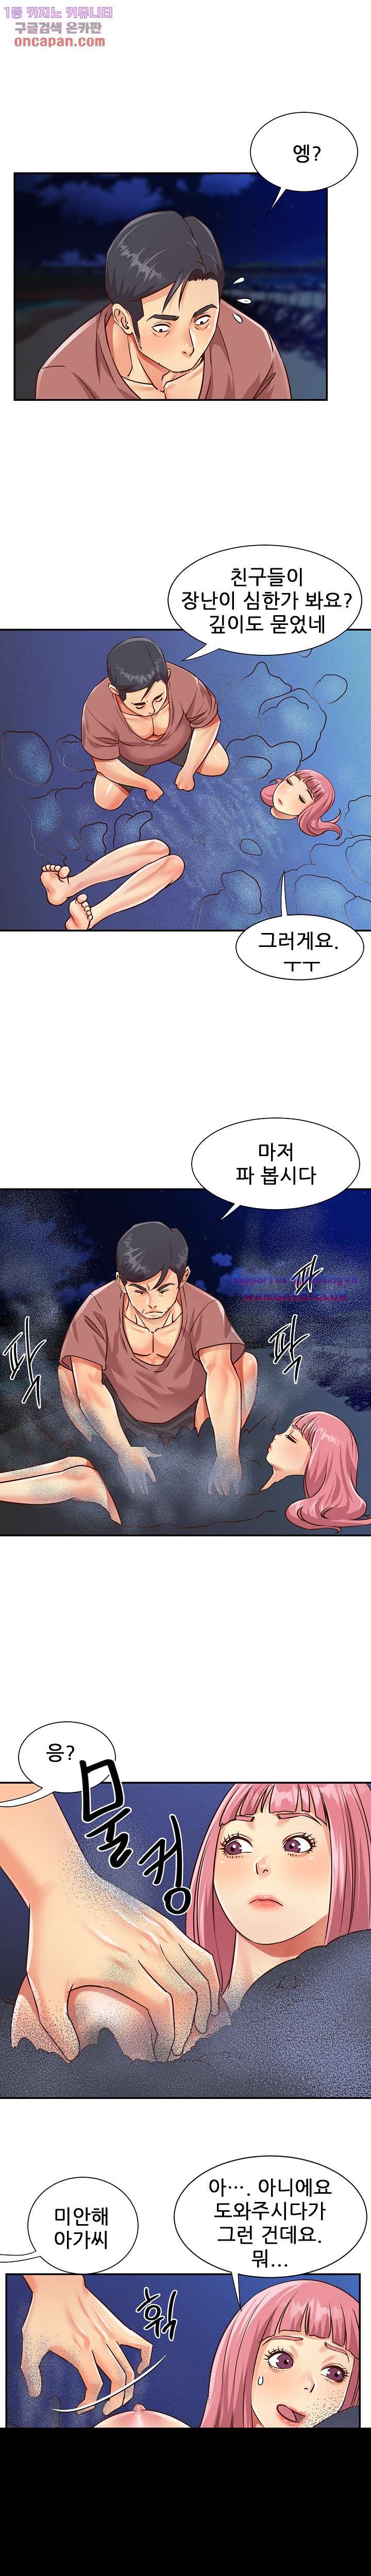 two-sisters-raw-chap-38-5